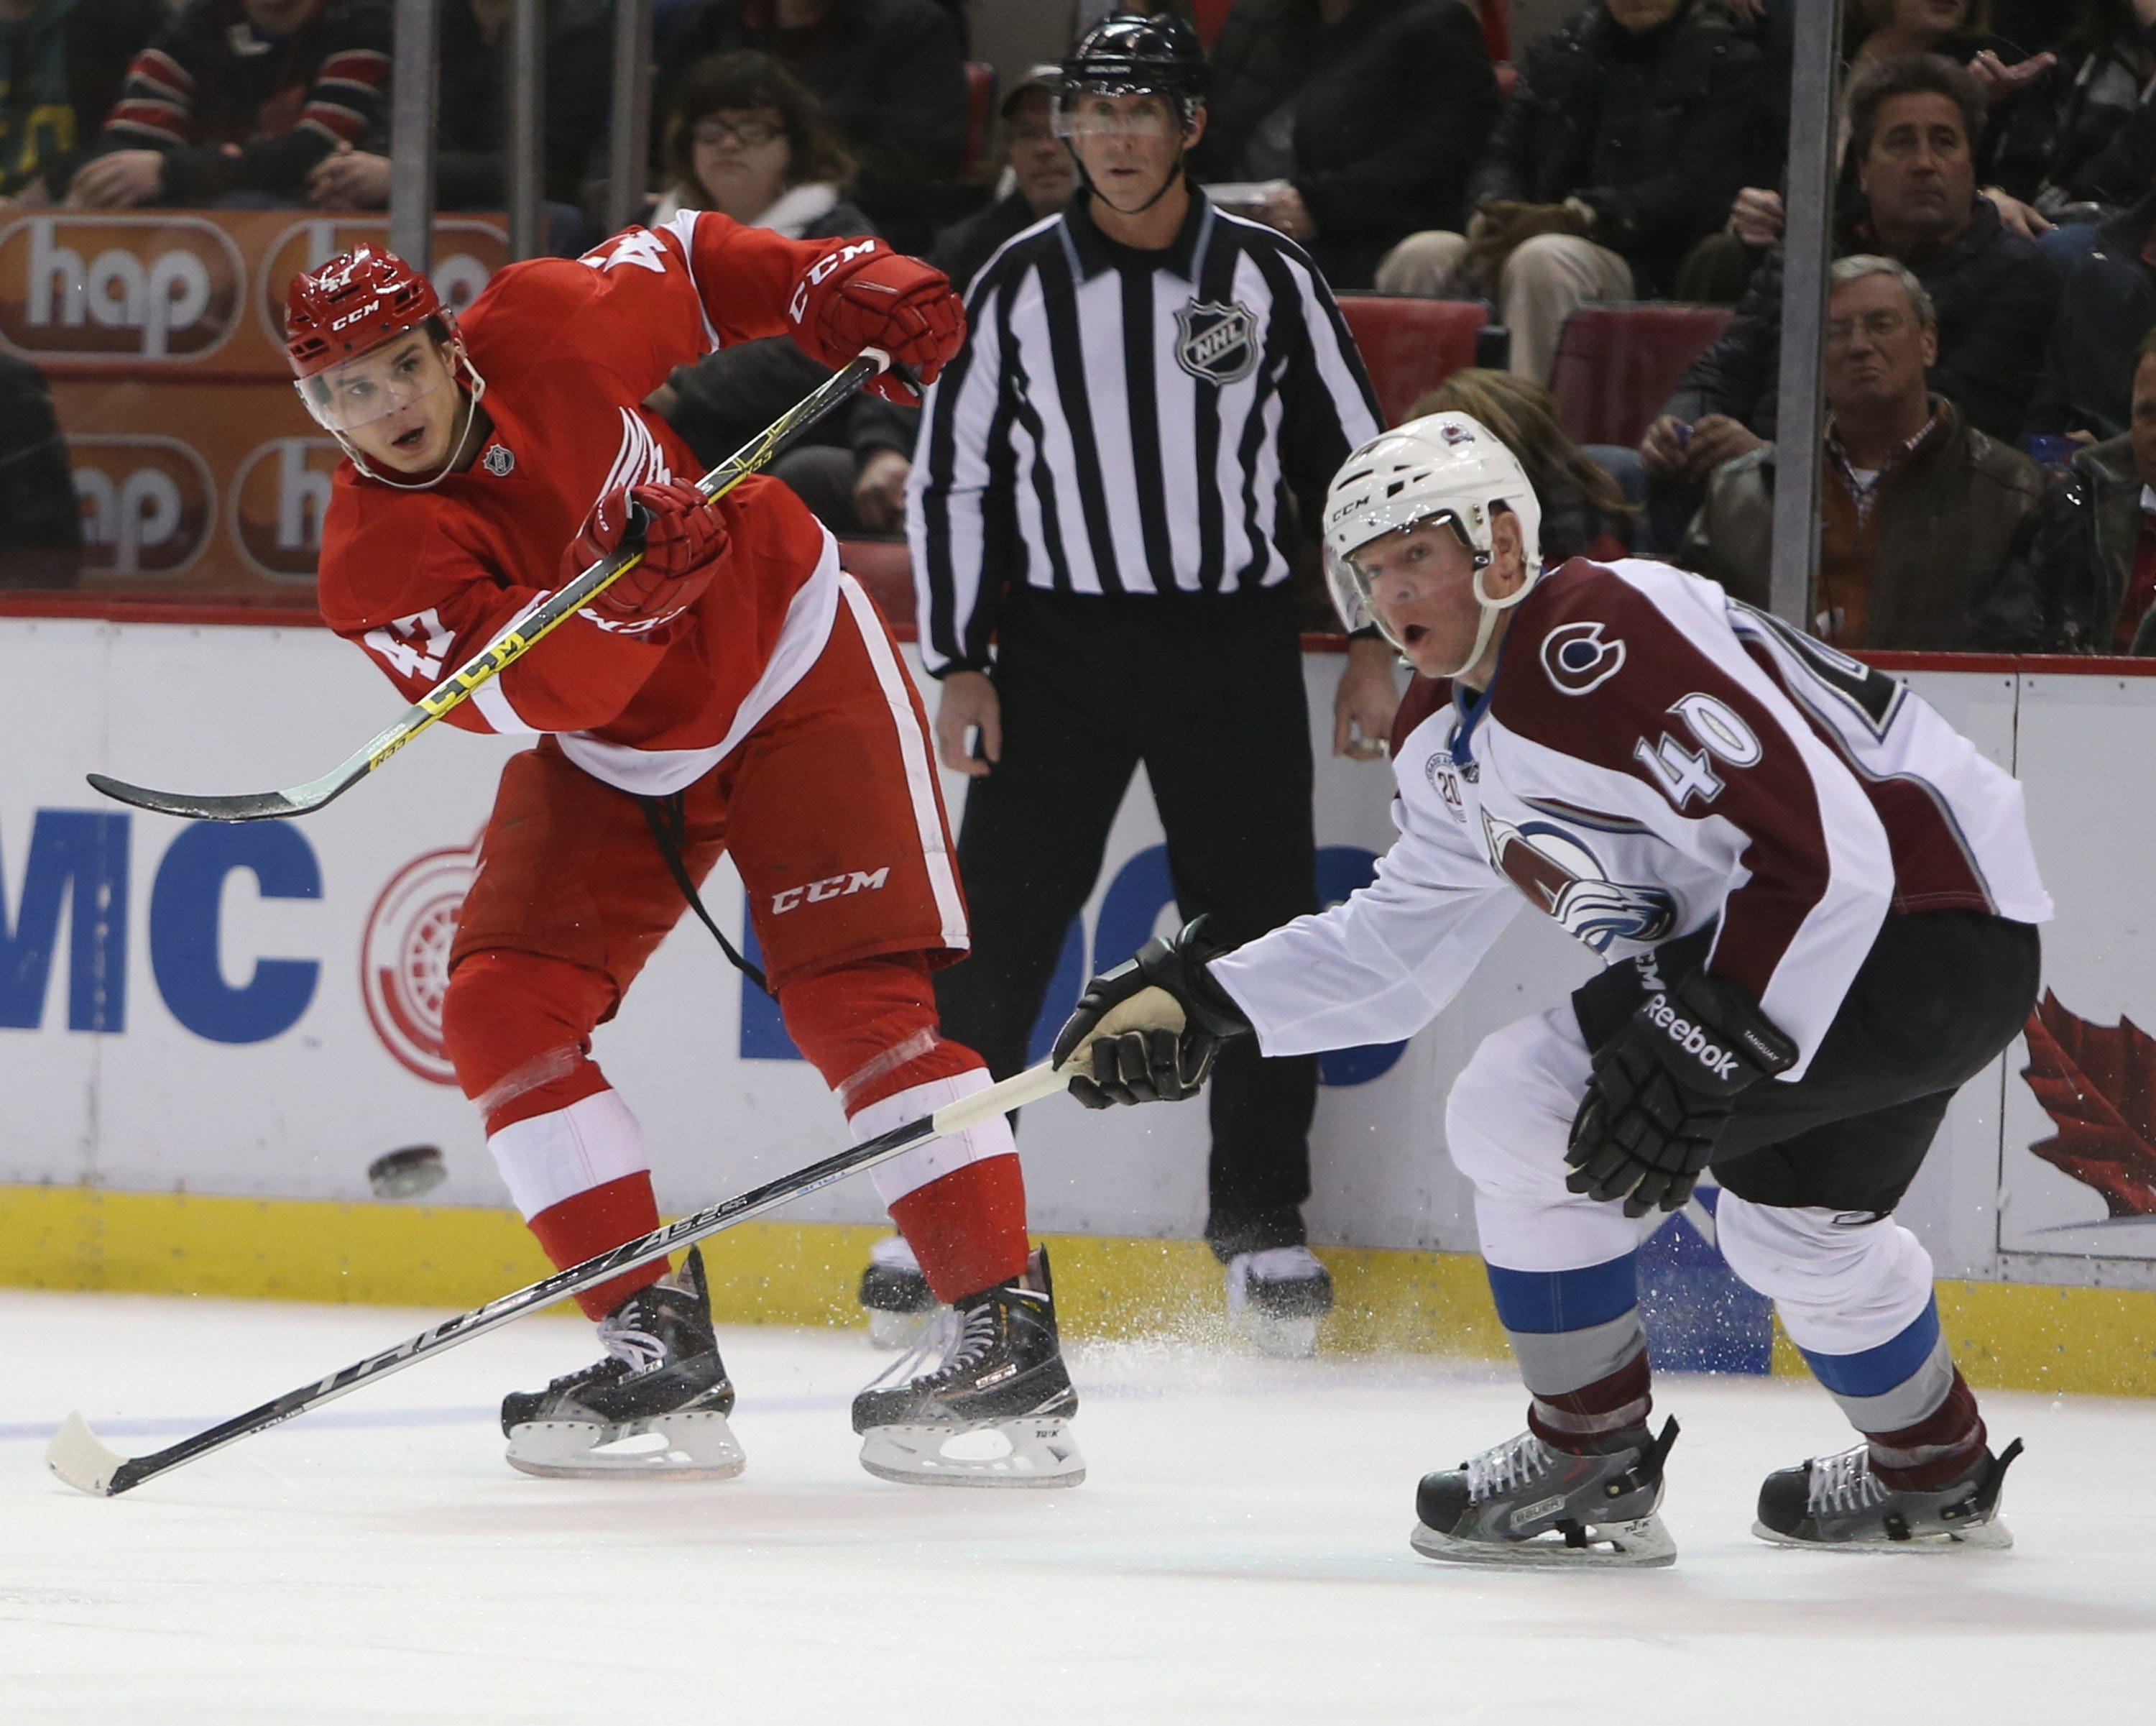 Detroit Red Wings hire old nemesis to help coach up power play: Alex Tanguay